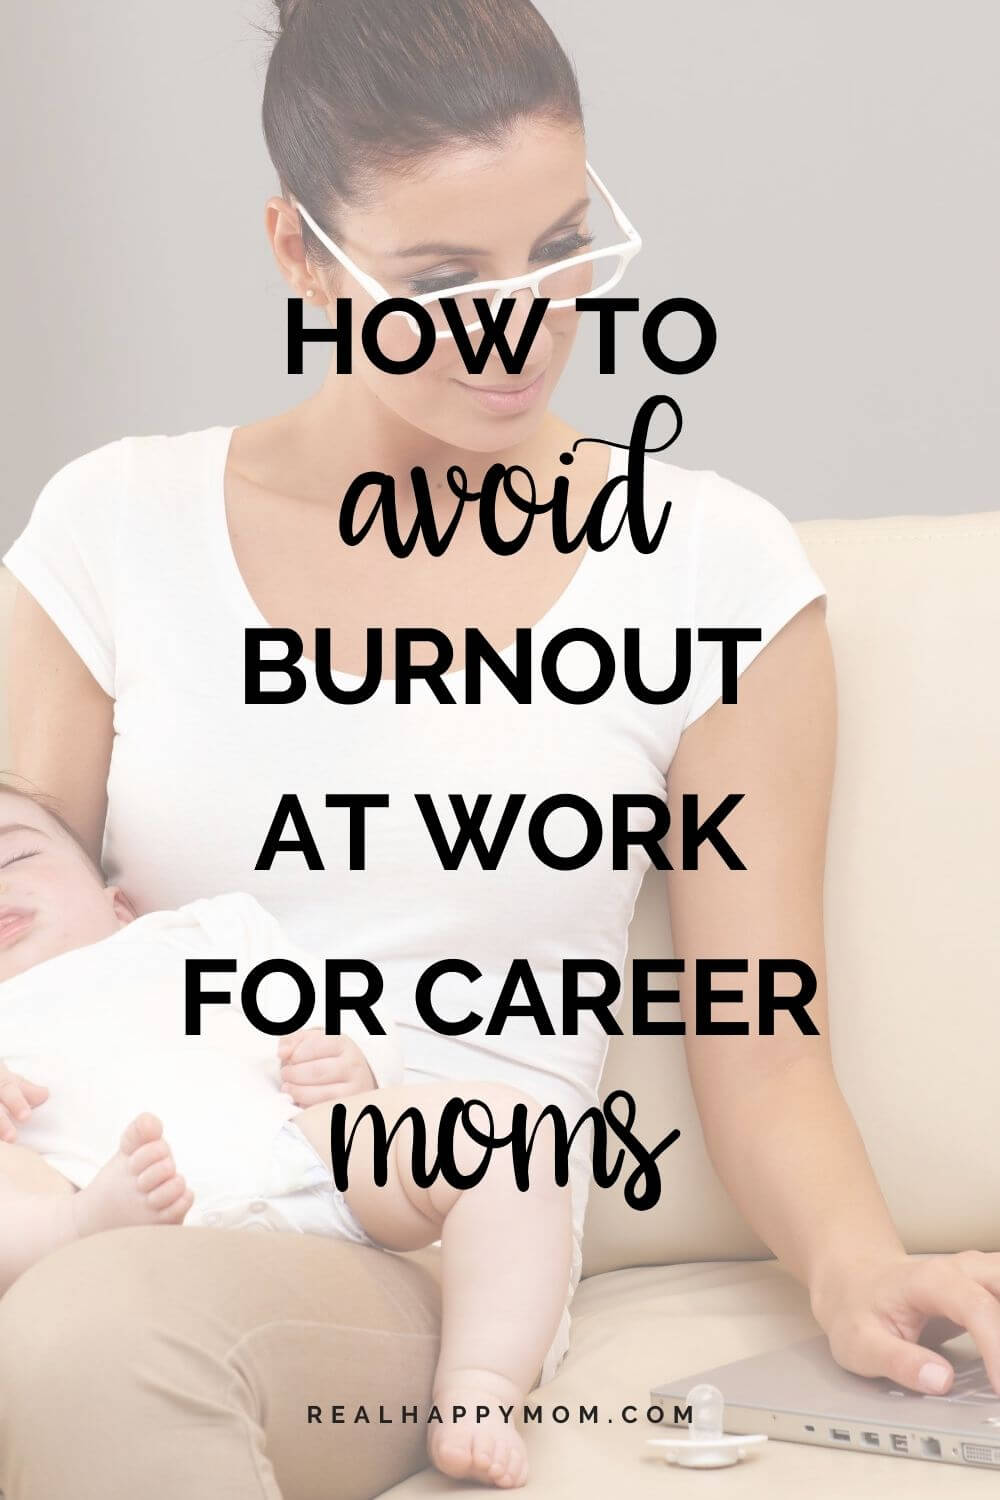 How to Avoid Burnout at Work for Career Moms